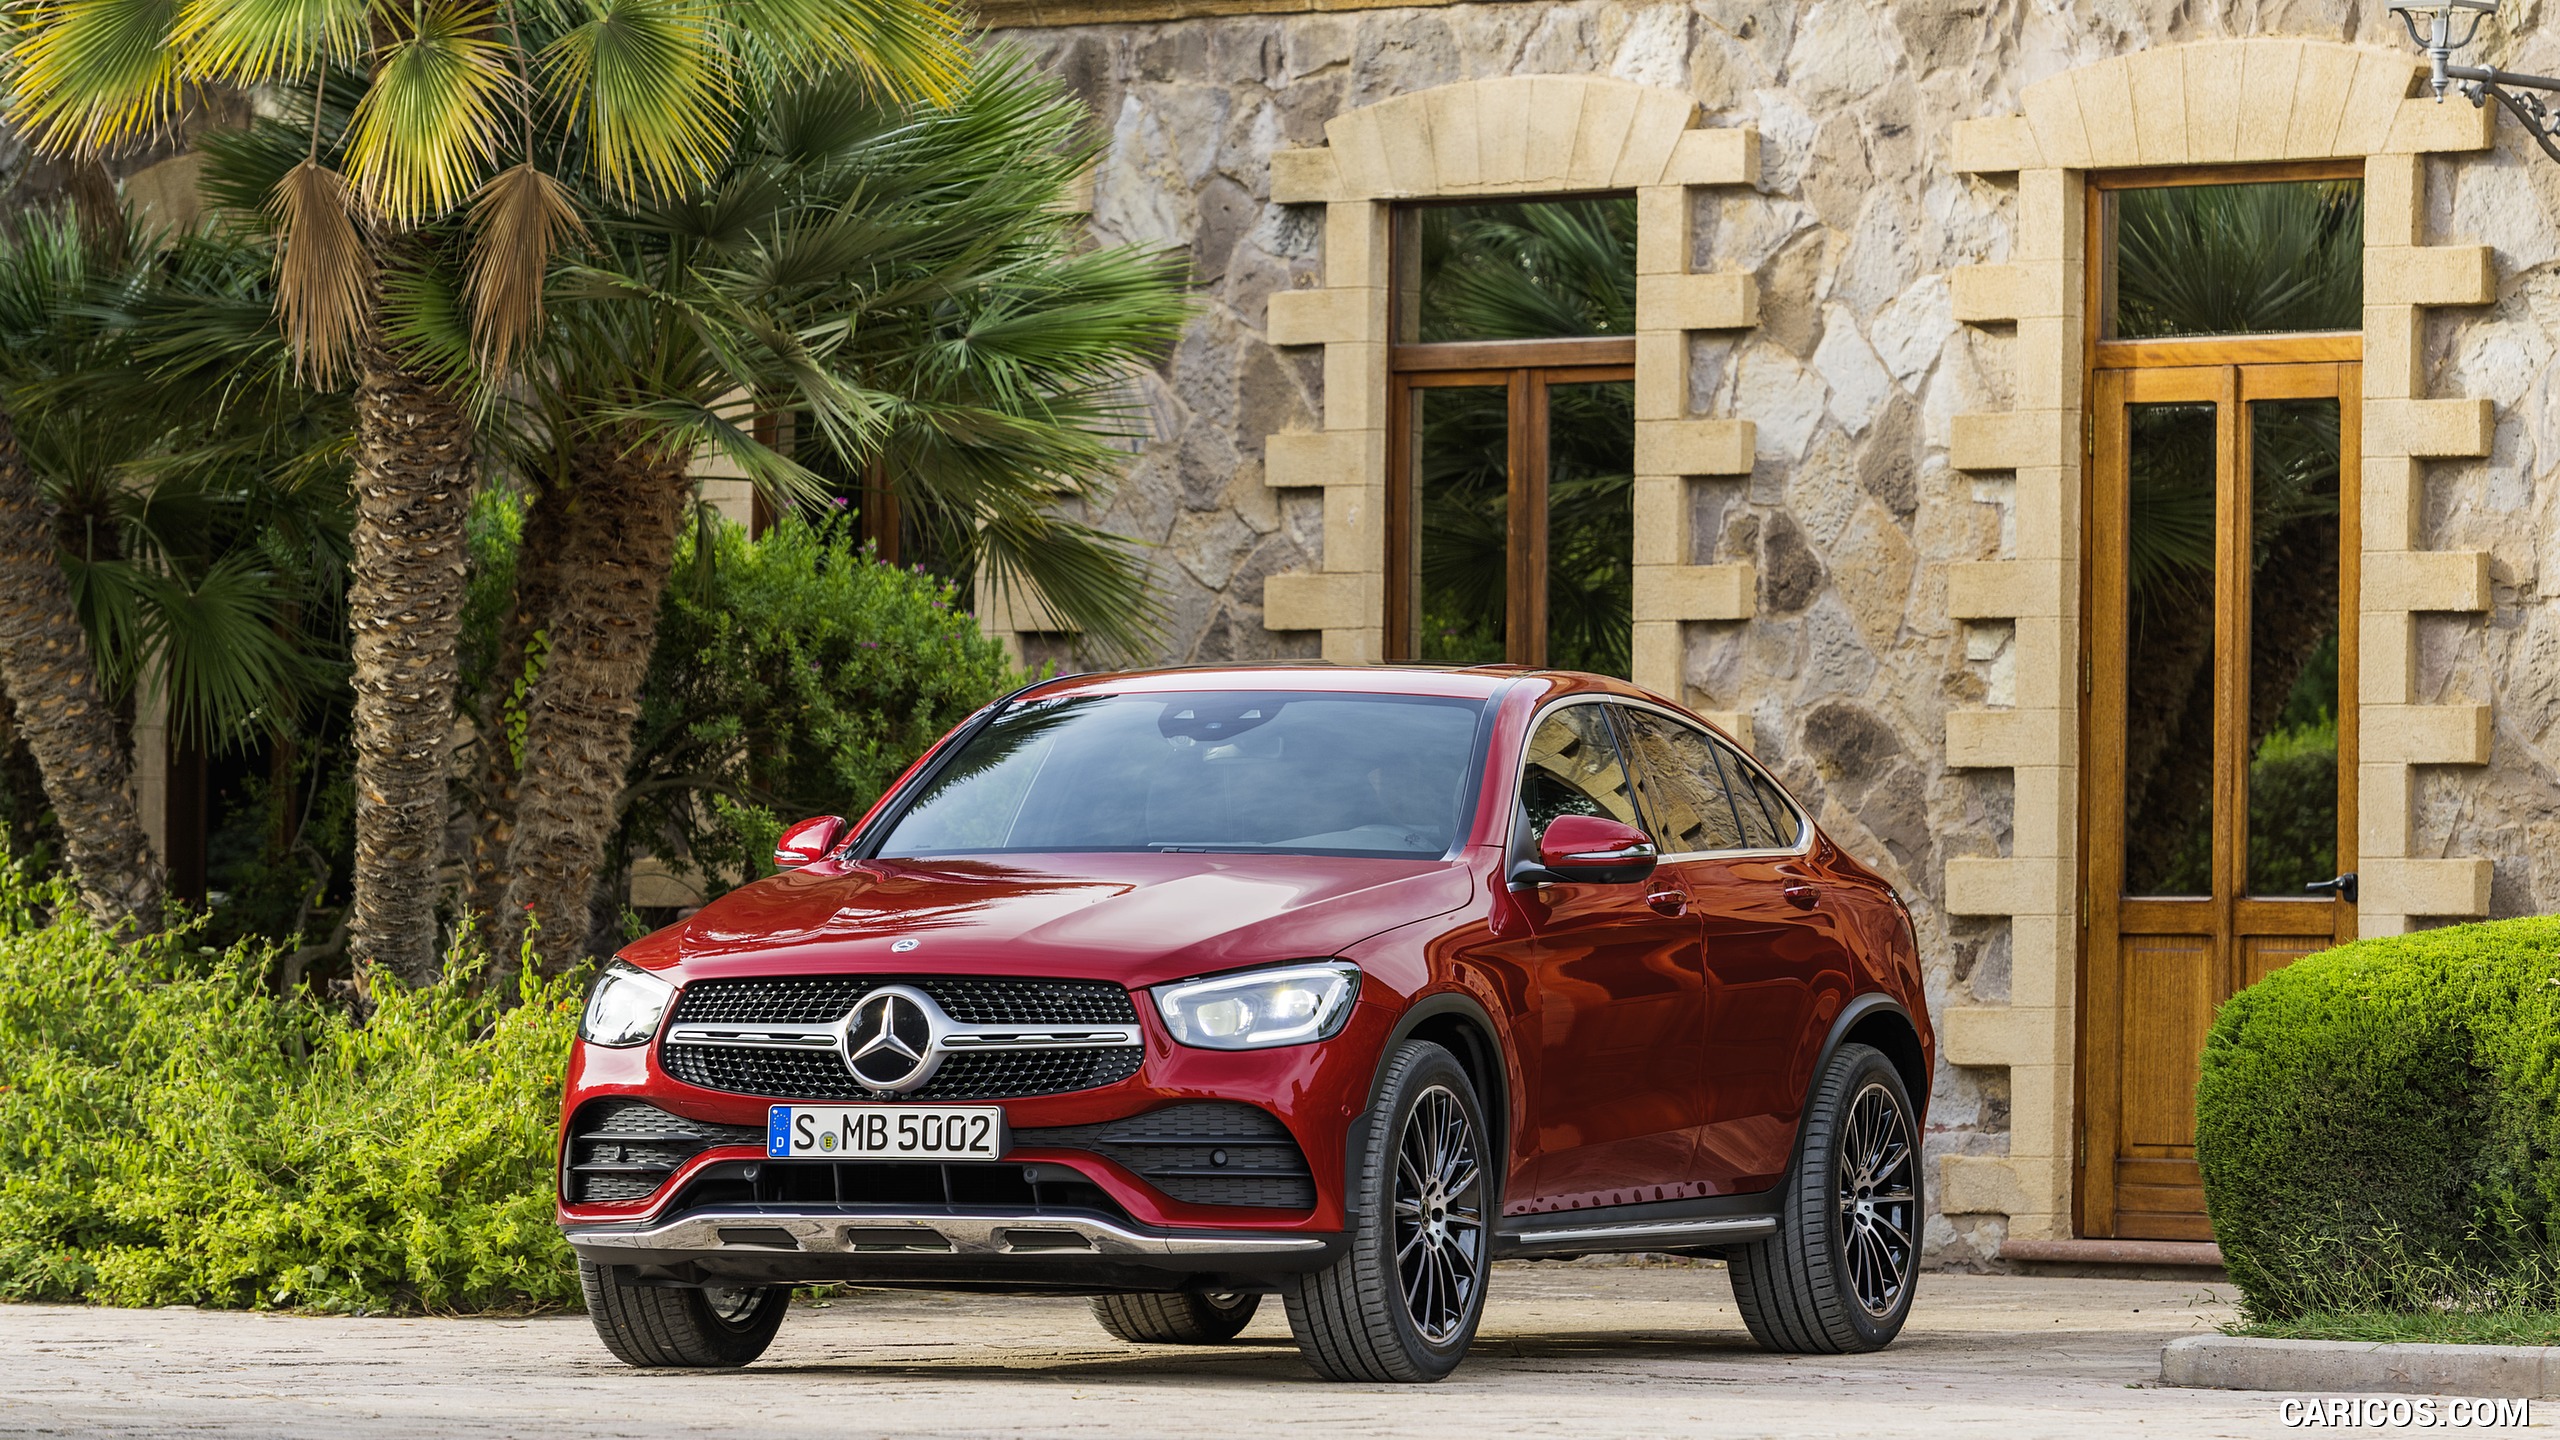 2020 Mercedes-Benz GLC 300 Coupe 4MATIC (Color: Designo Hyacinth Red Metallic) - Front Three-Quarter, #14 of 165